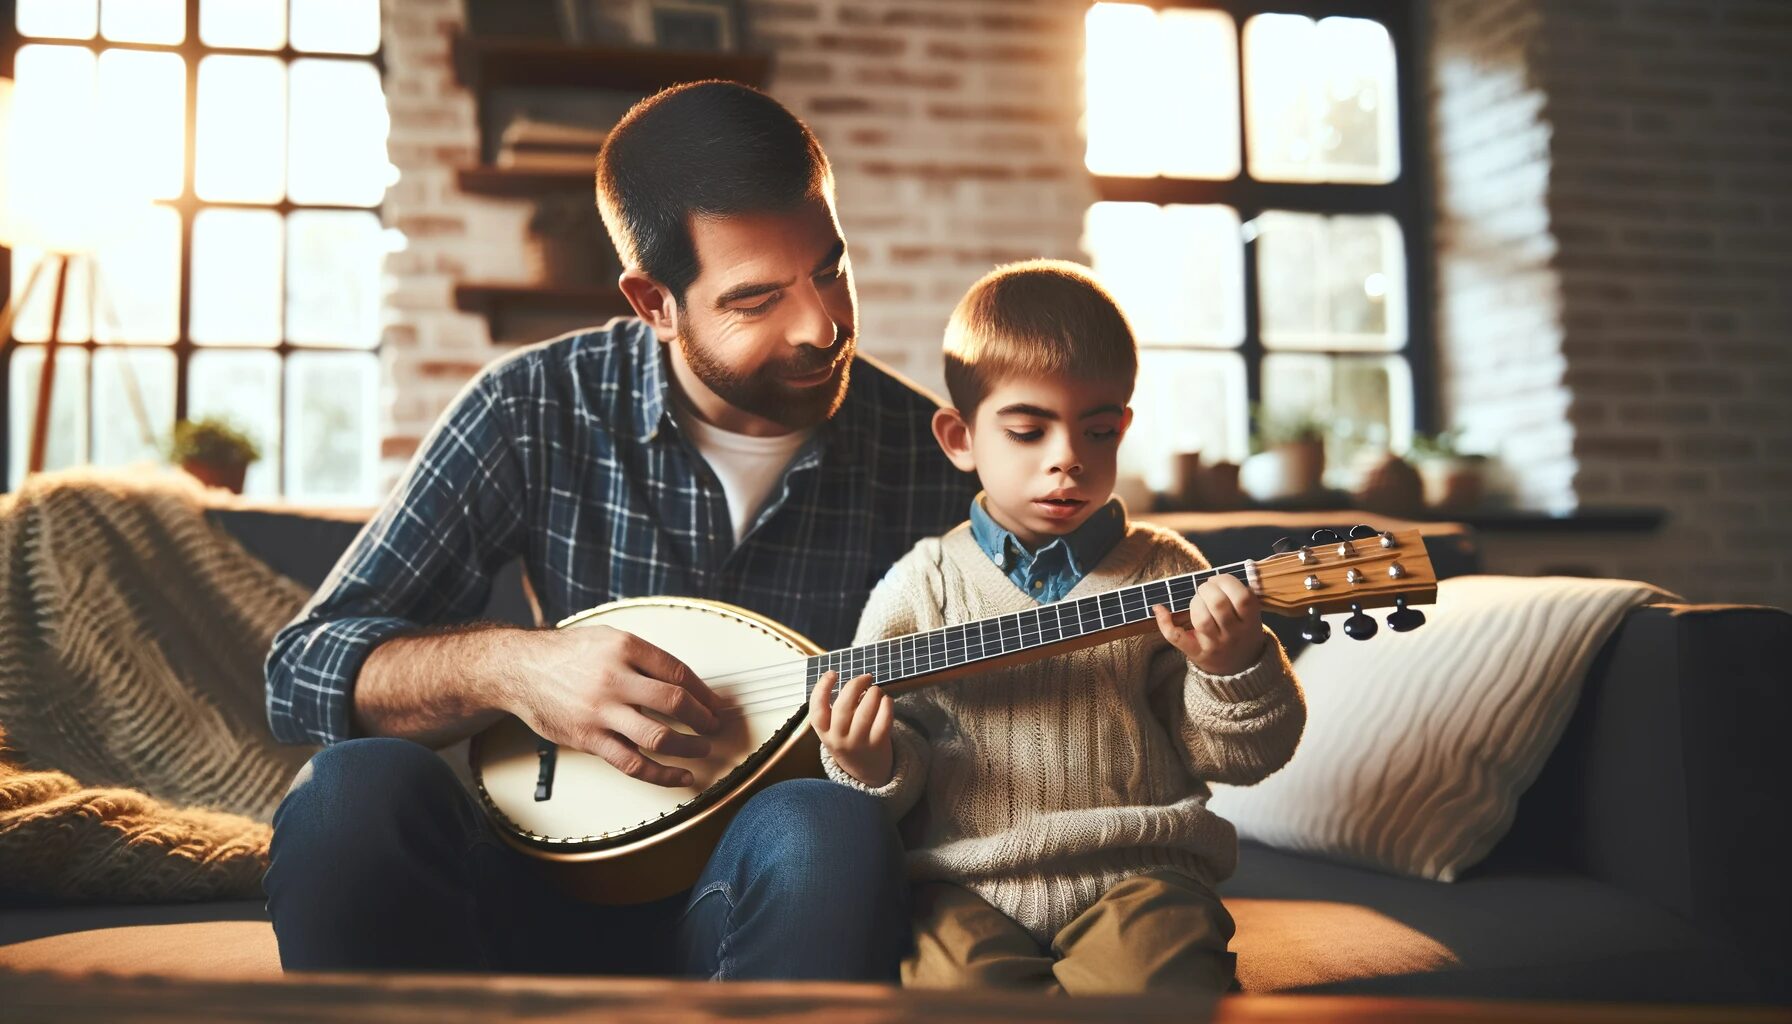 A photograph of a parent and child with a disability playing a musical instrument together in their living room.